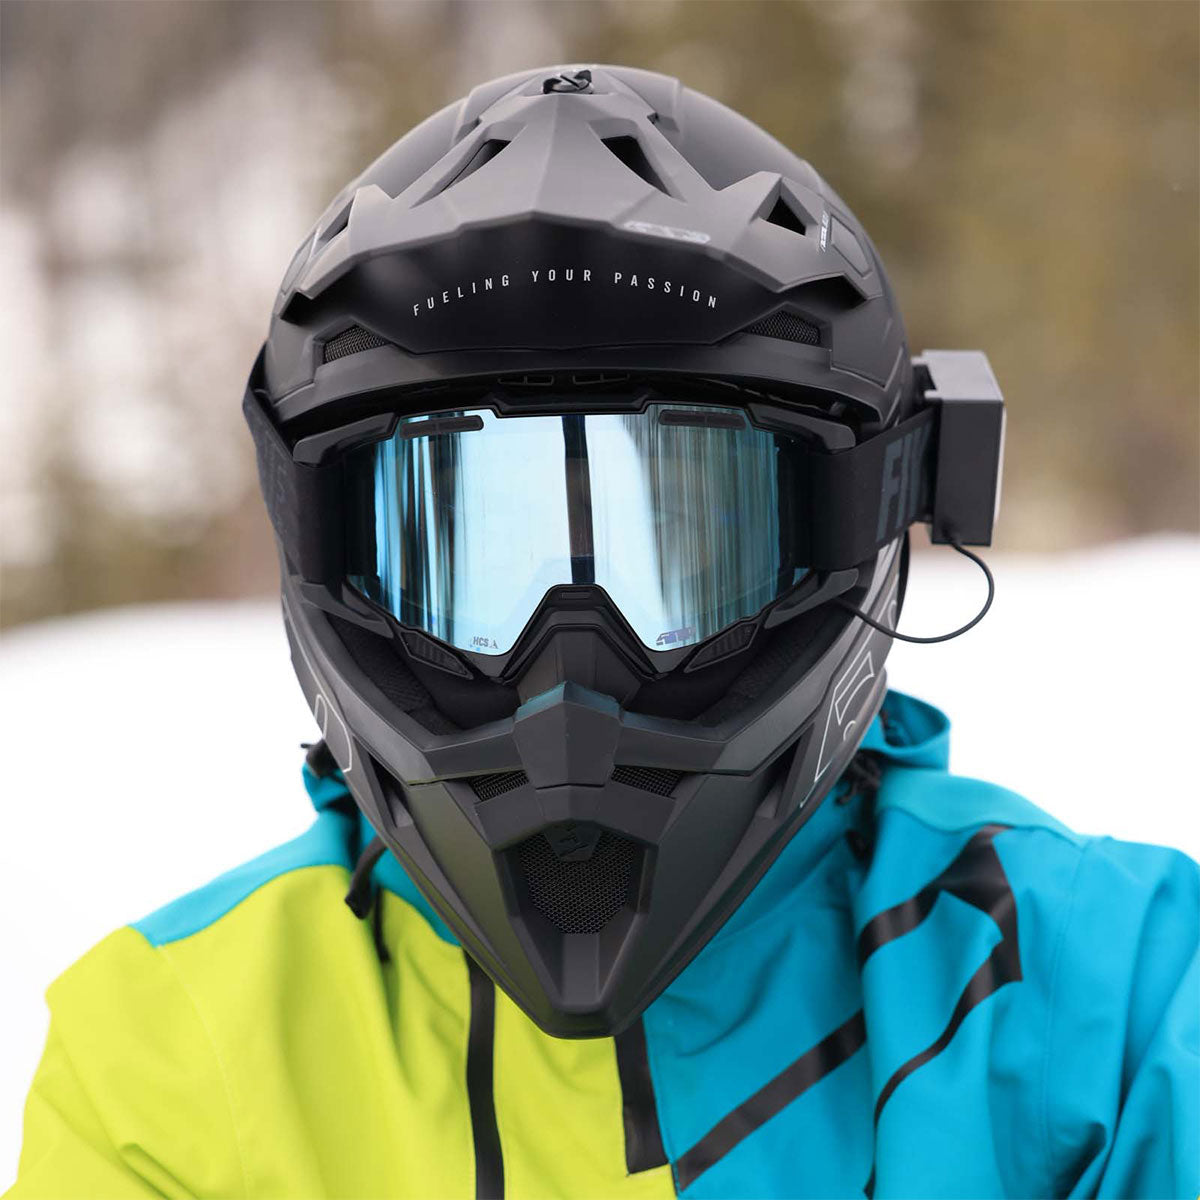 What is an Ignite Goggle?